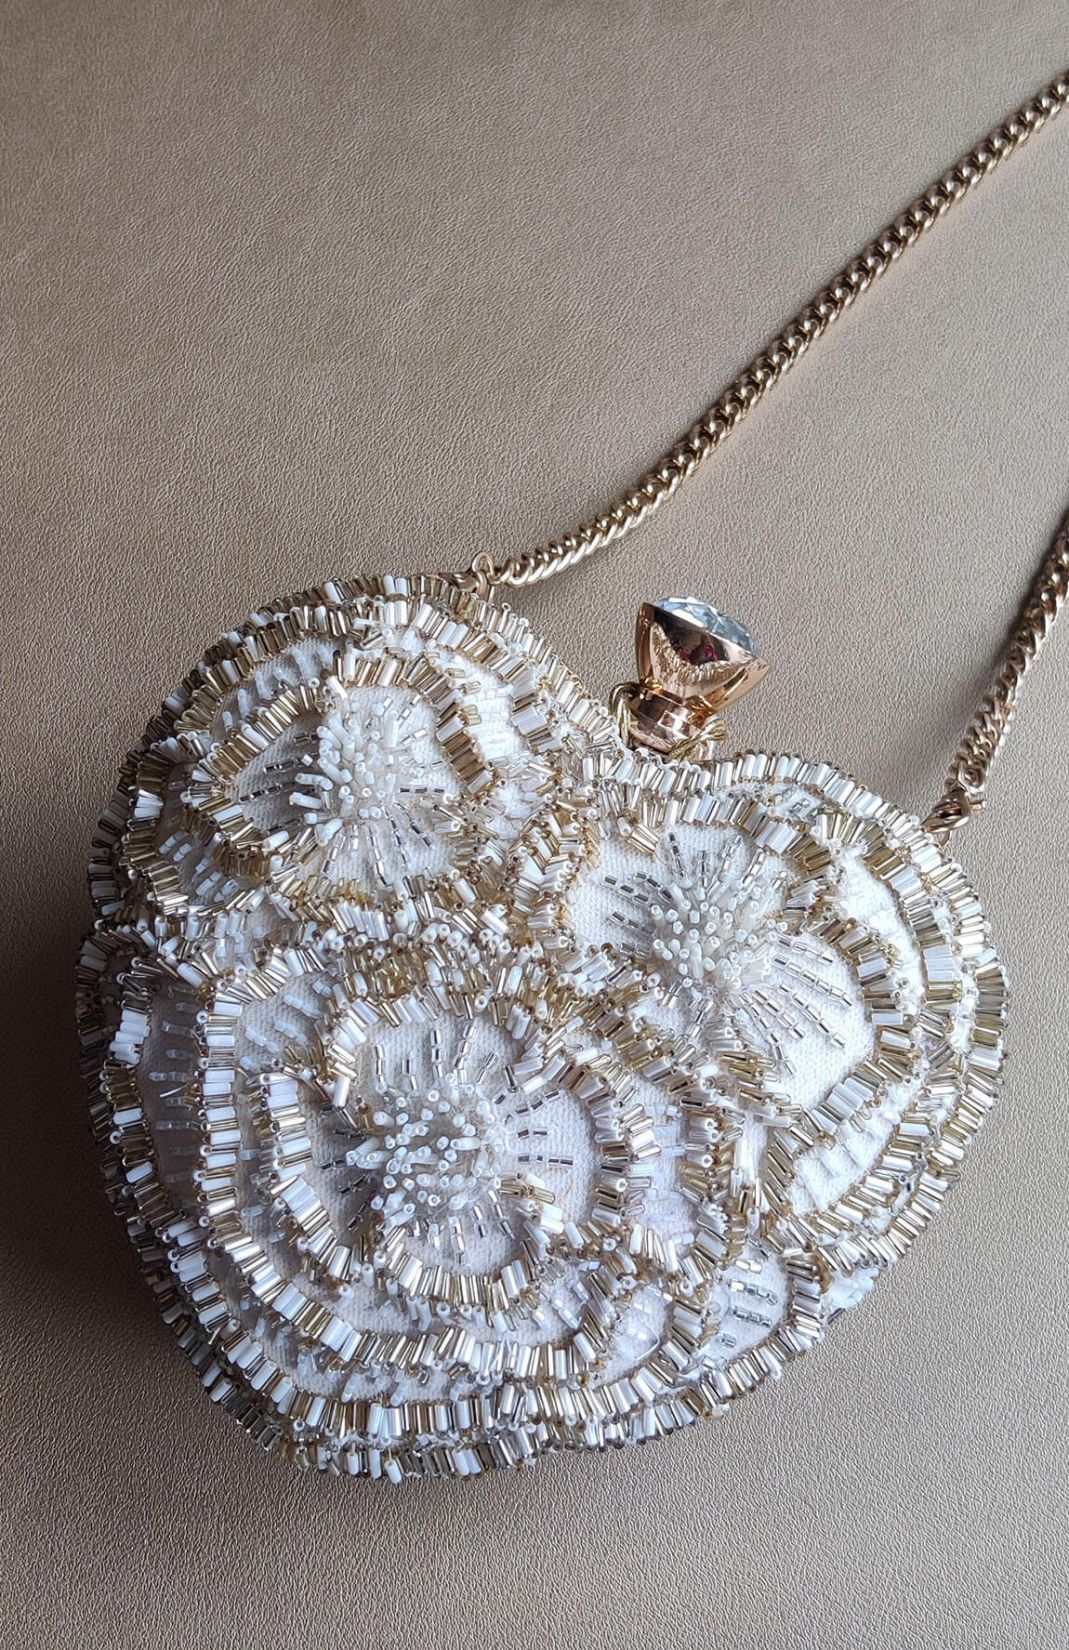 The Heart Clutch & Sling Bag In Pearl White